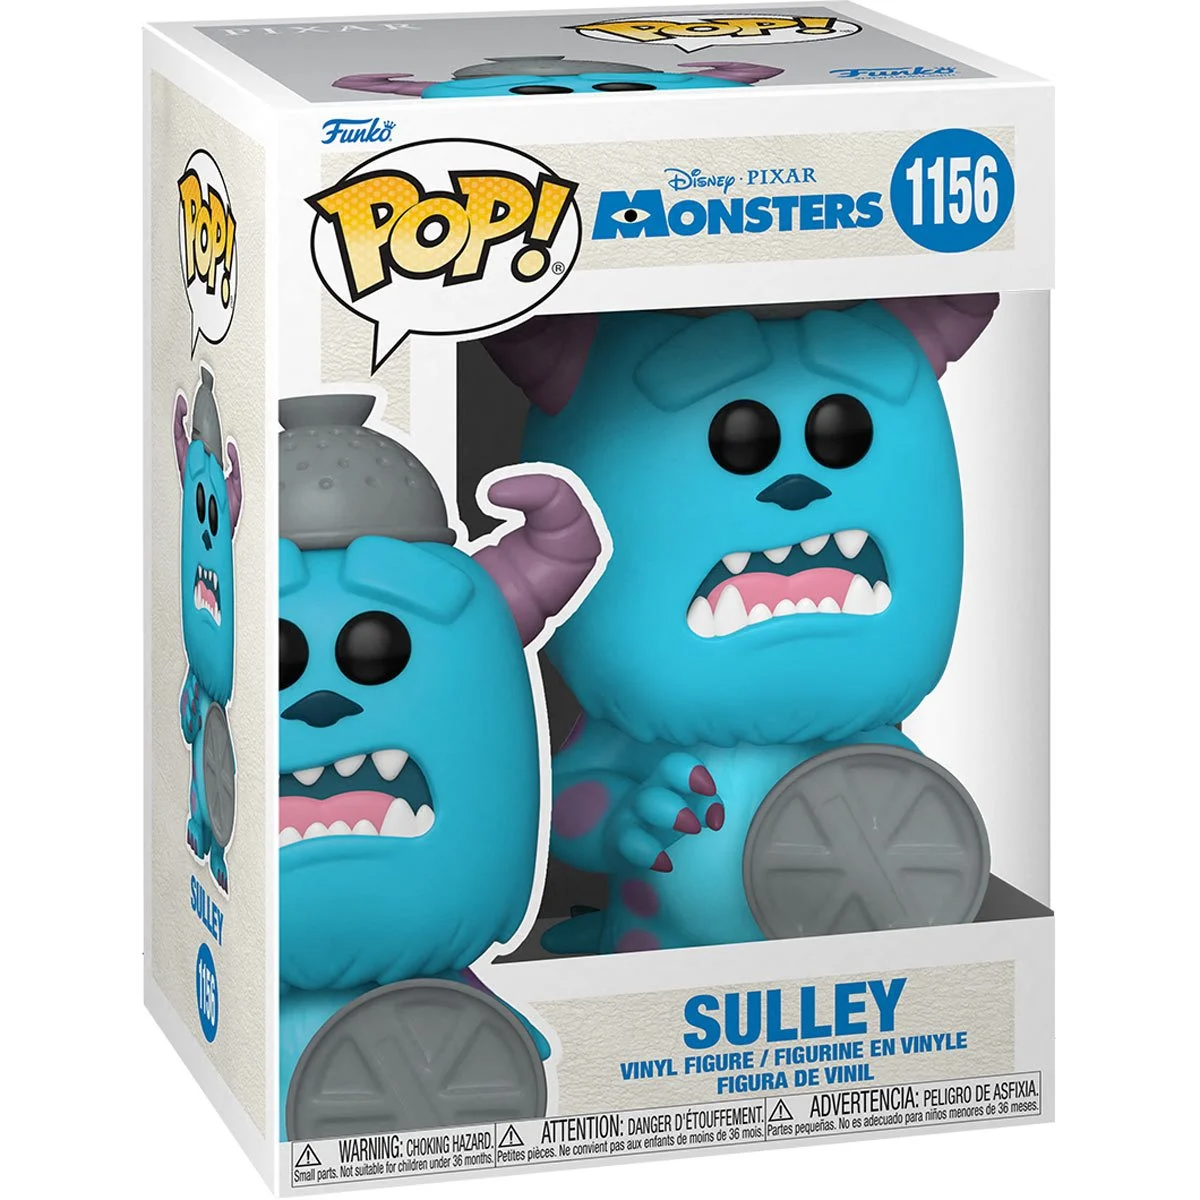 EXCLUSIVE DROP: Loungefly Disney Moments Pixar Monsters Inc Sully